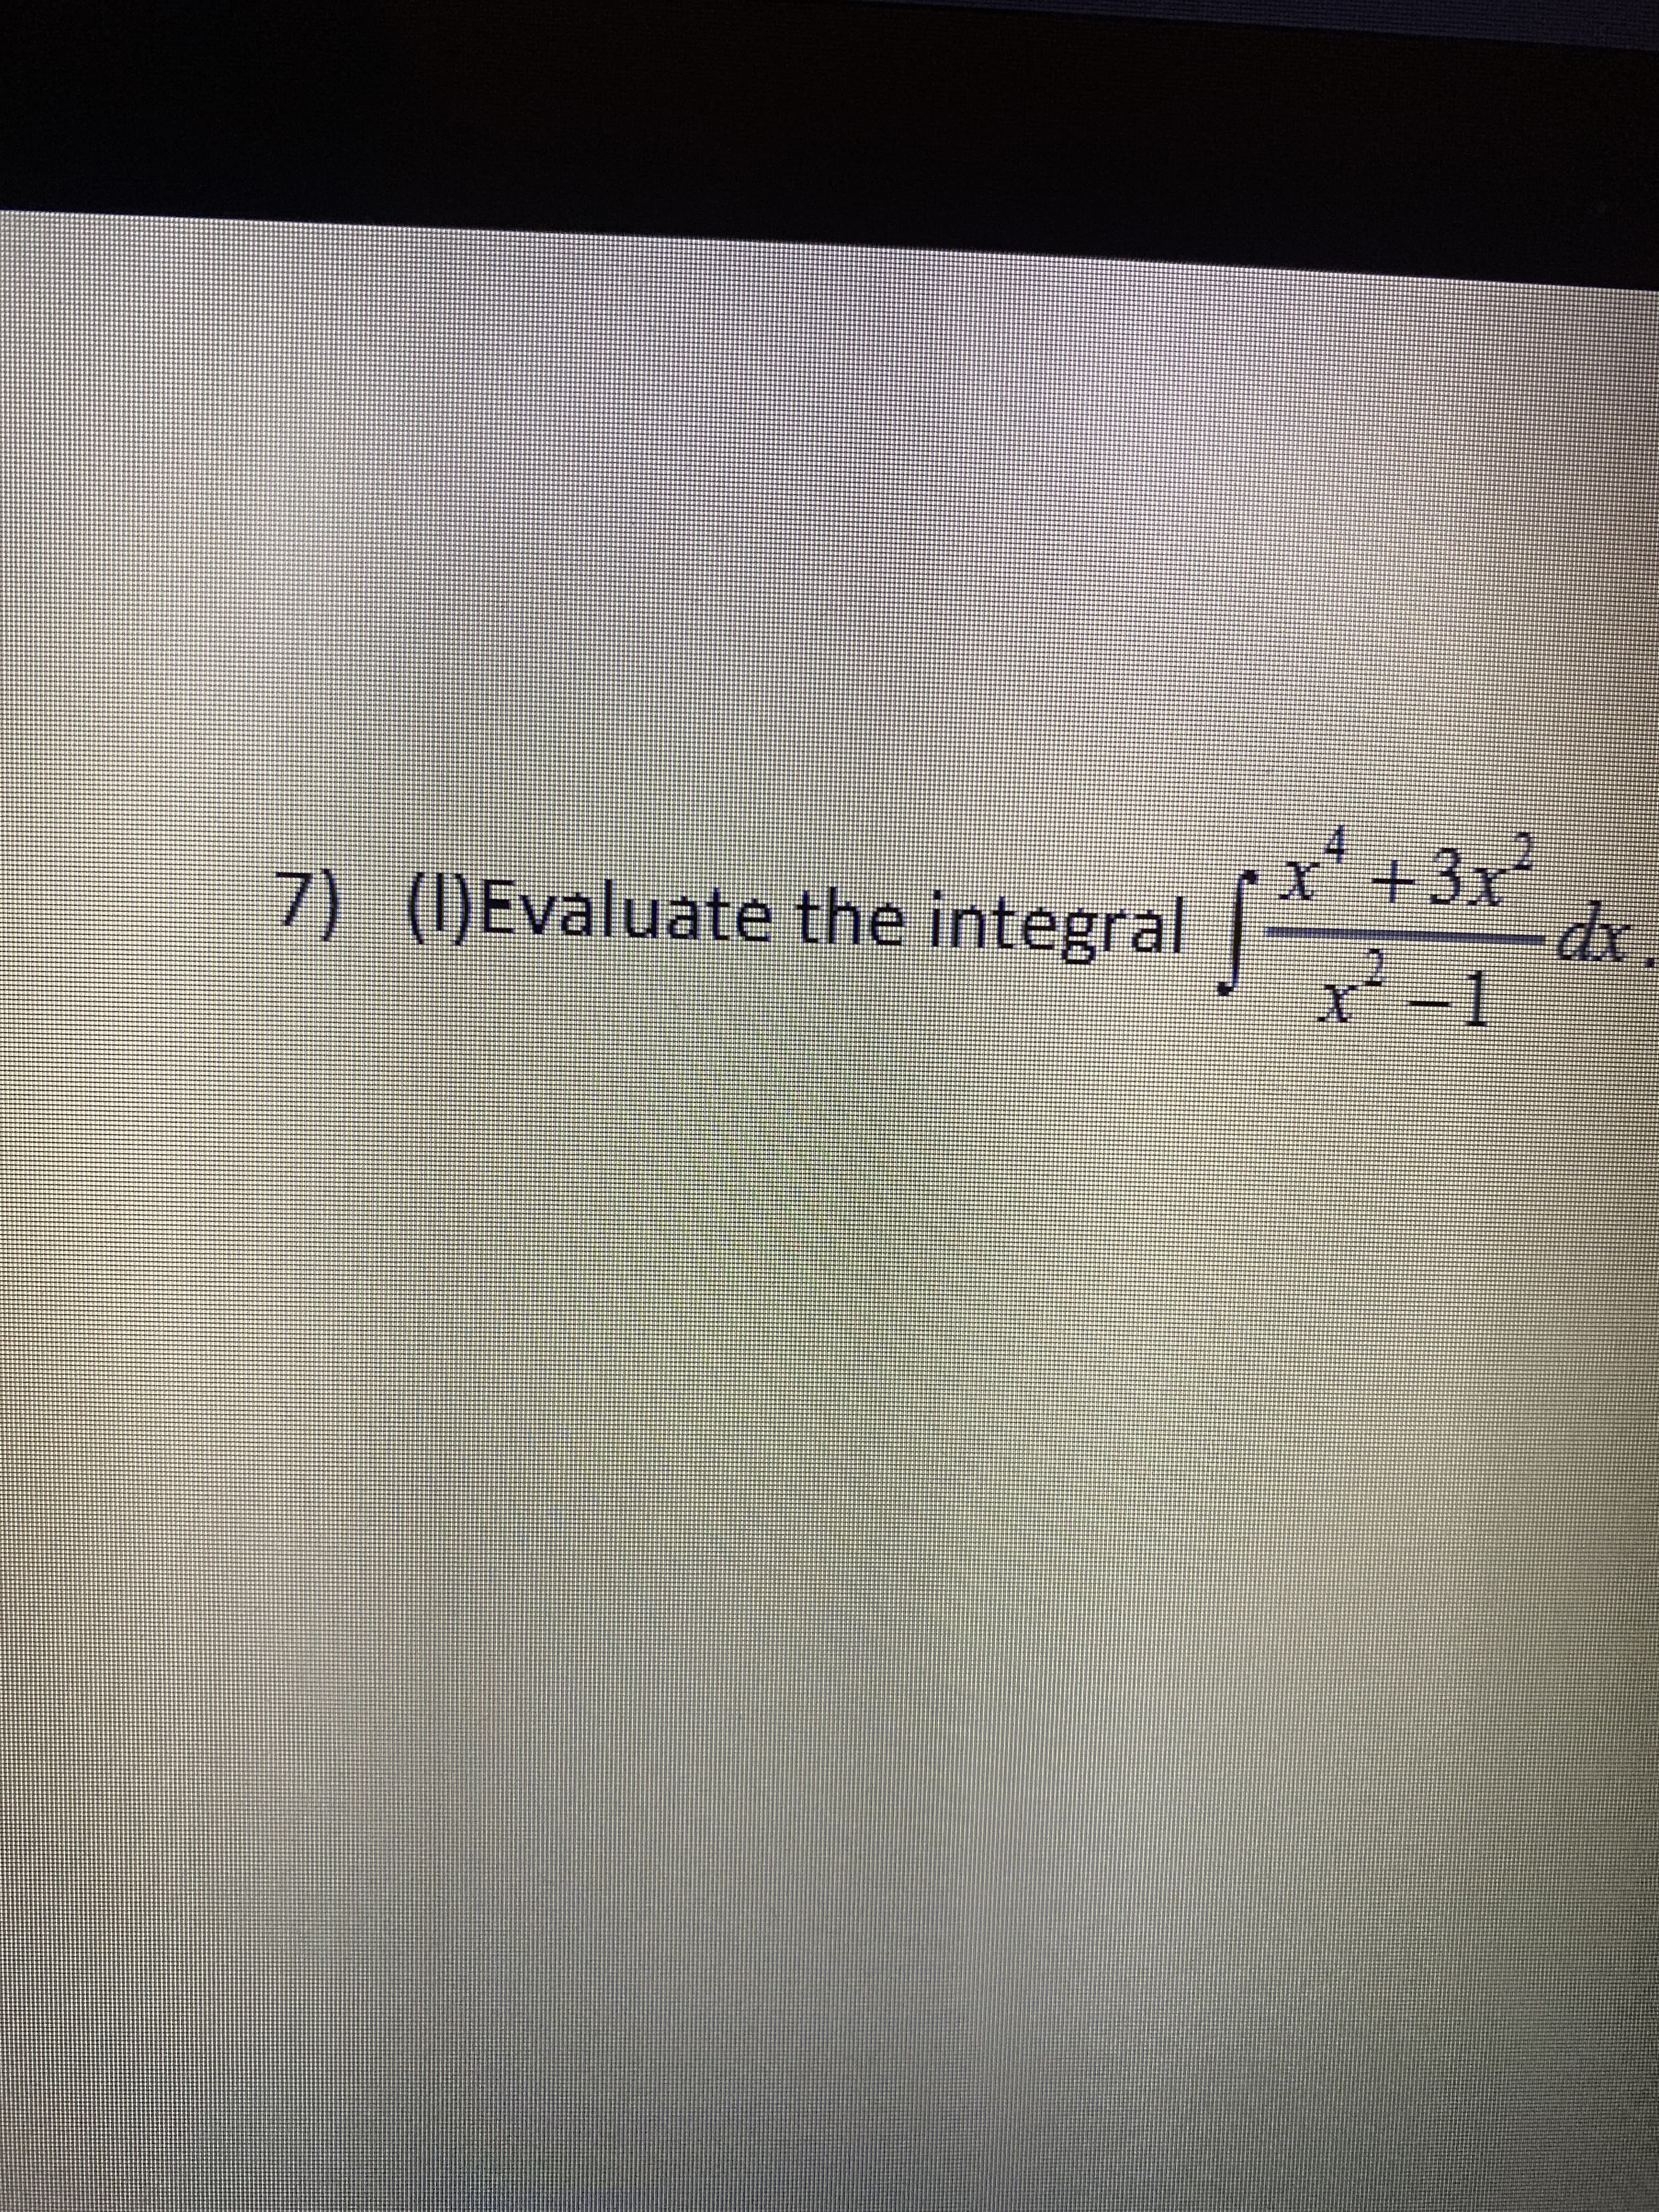 EGO
7) ()Evaluate the integral
r
4.
+3x²
x.
I-ズ
